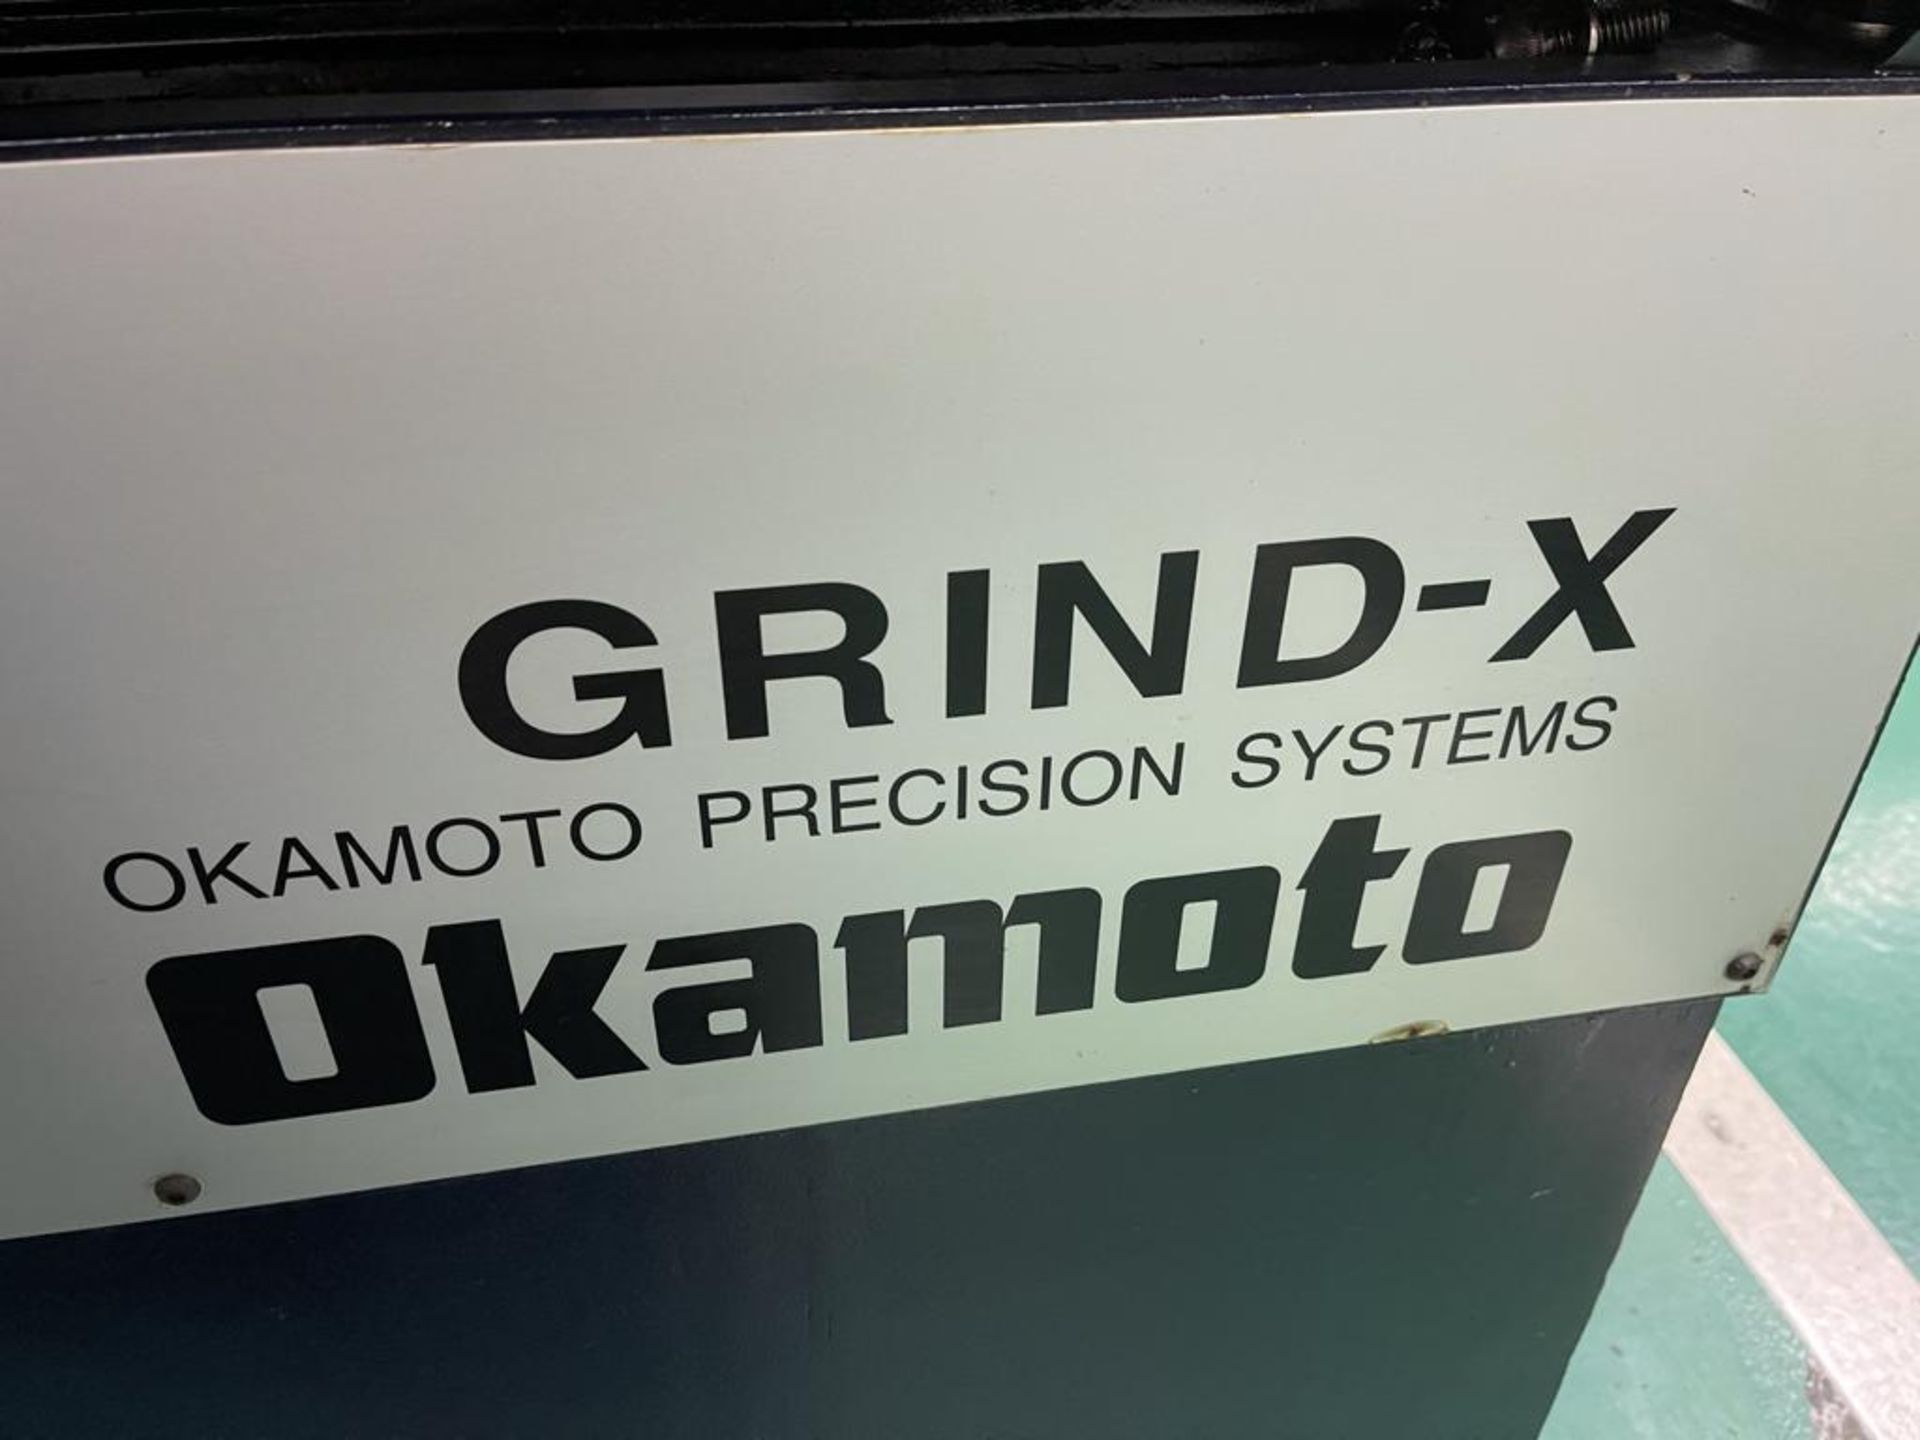 2011 OKAMOTO PRECISION INTERNAL GRINDER IGM-2MB WITH MOI CONTROL, S/N 17026 - Image 8 of 11